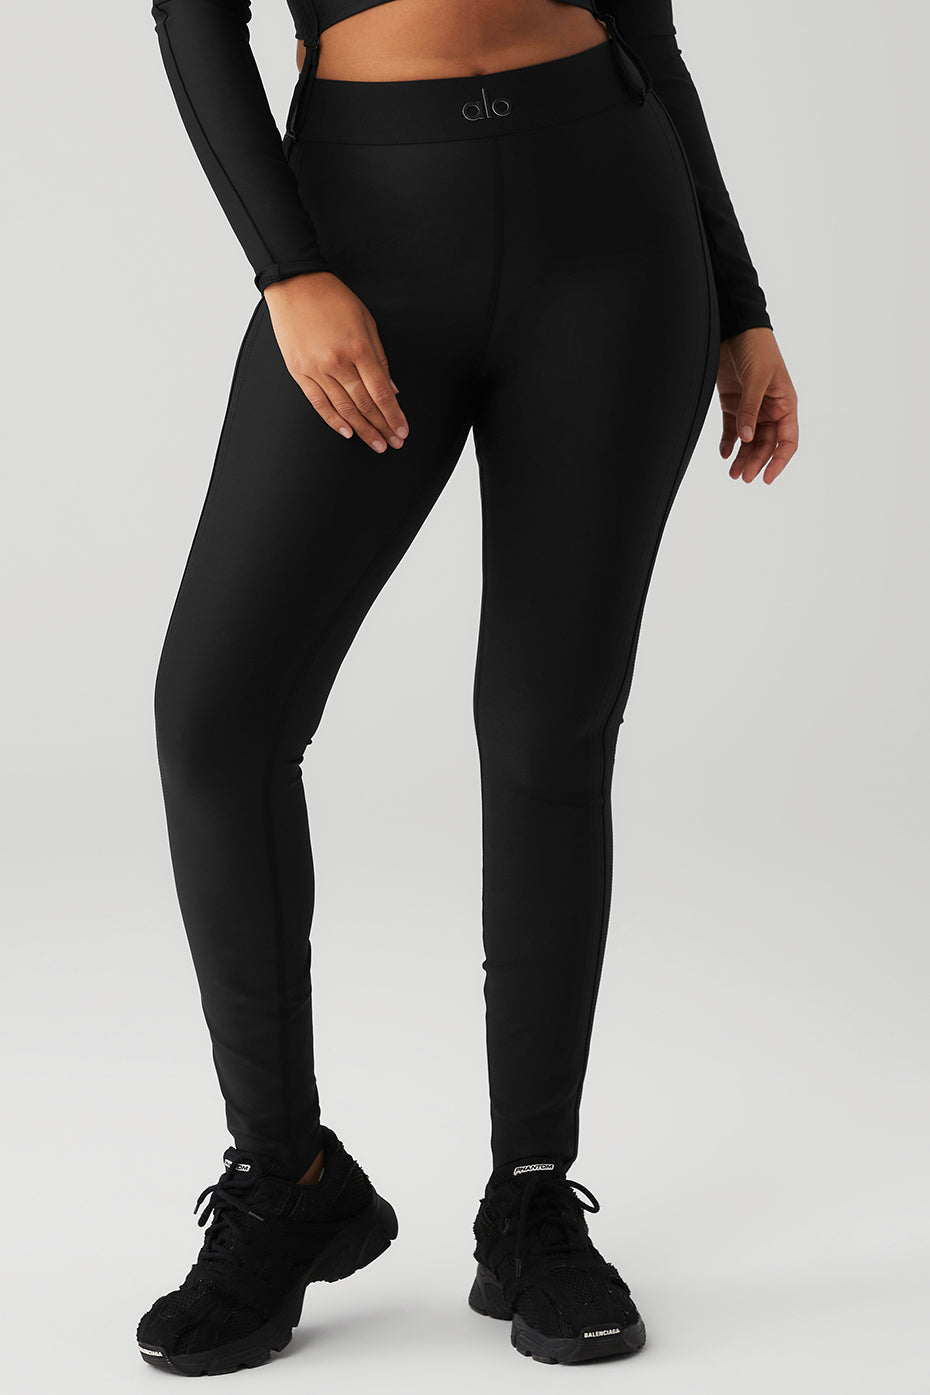 Plus Size High-waist Reflective Piping Fitness Leggings Grey 2x